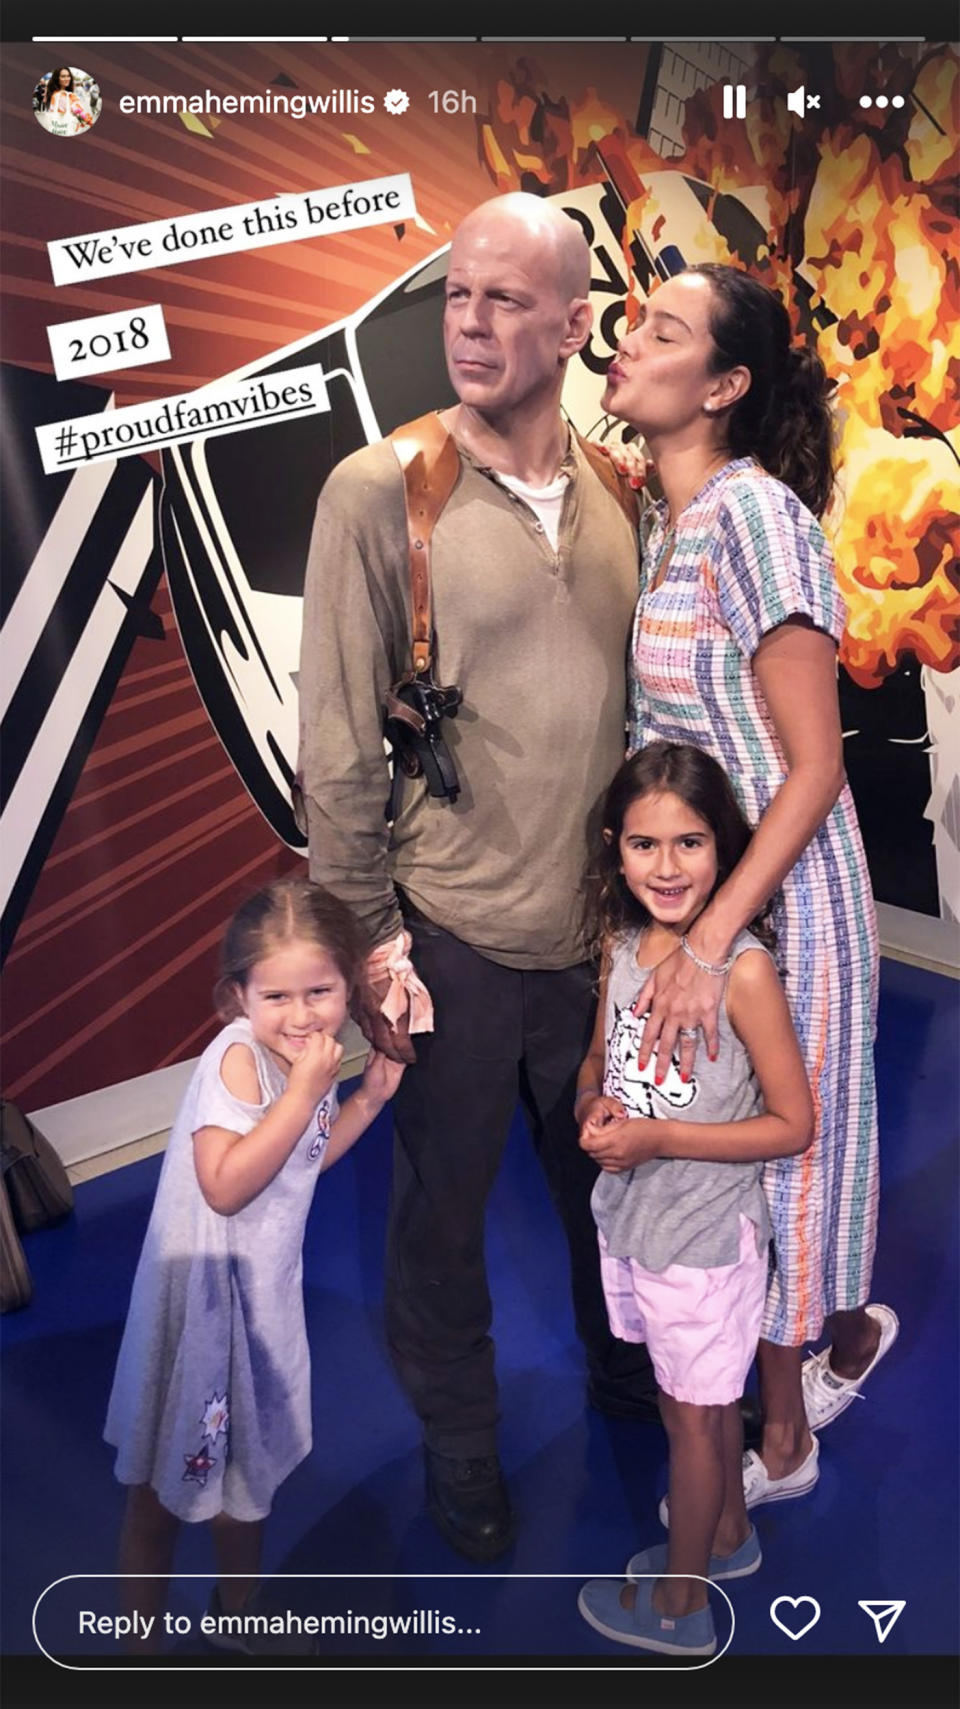 The family's previous trip to Willis' wax statue in 2018. (@emmahemingwillis via Instagram)